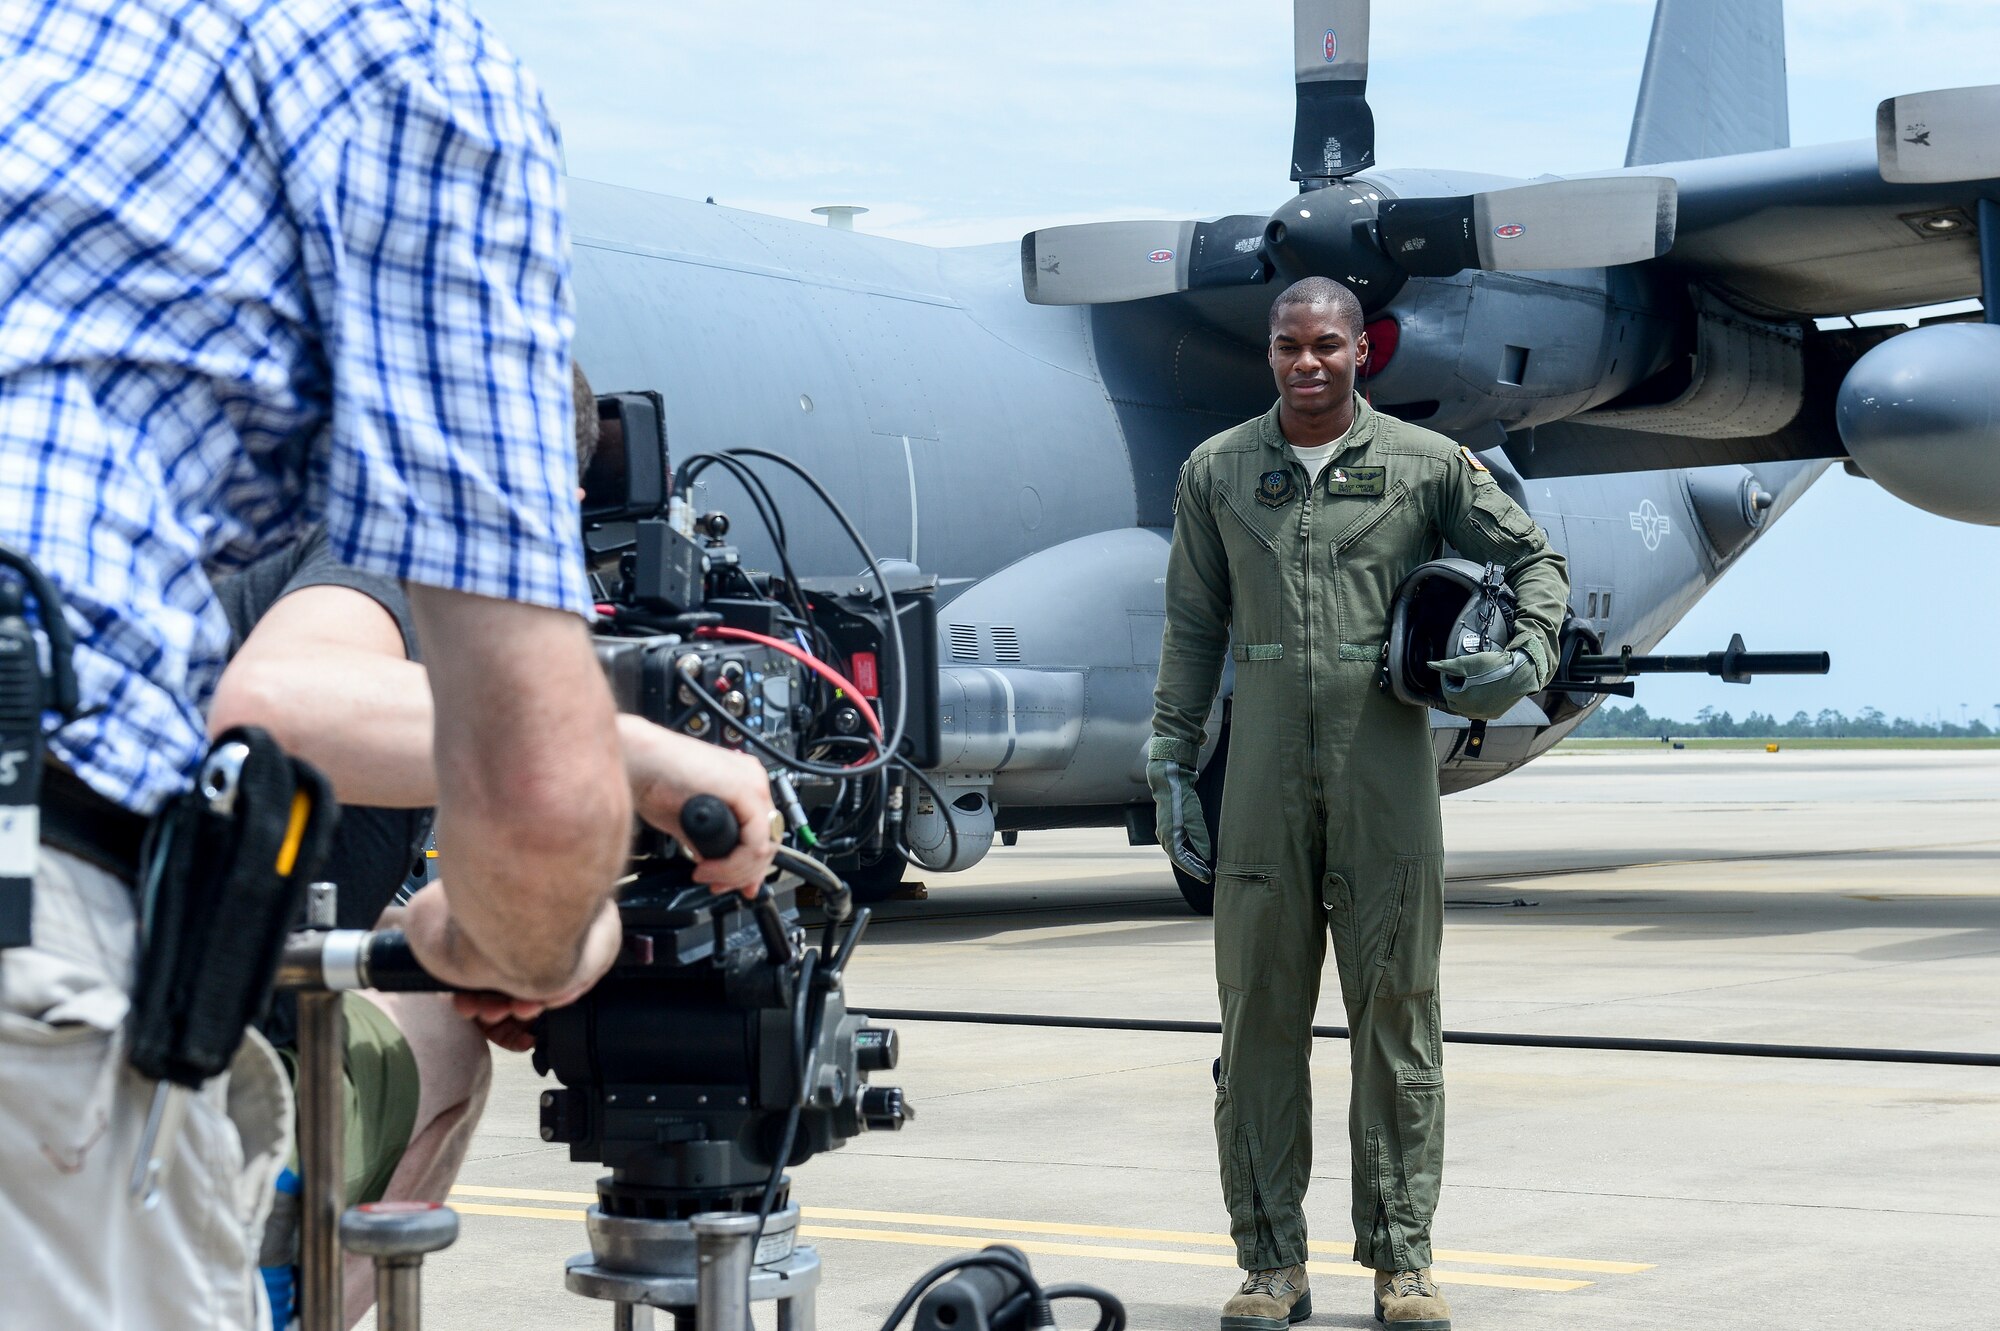 Staff Sgt. Blake Owens, 4th Special Operations Squadron special missions aviator, filmed during an Air Force Recruiting commercial at Hurlburt Field, Fla., July 20, 2014. GSD&M Advertising filmed at Hurlburt Field for two days. (U.S. Air Force photo/Airman 1st Class Jeff Parkinson)